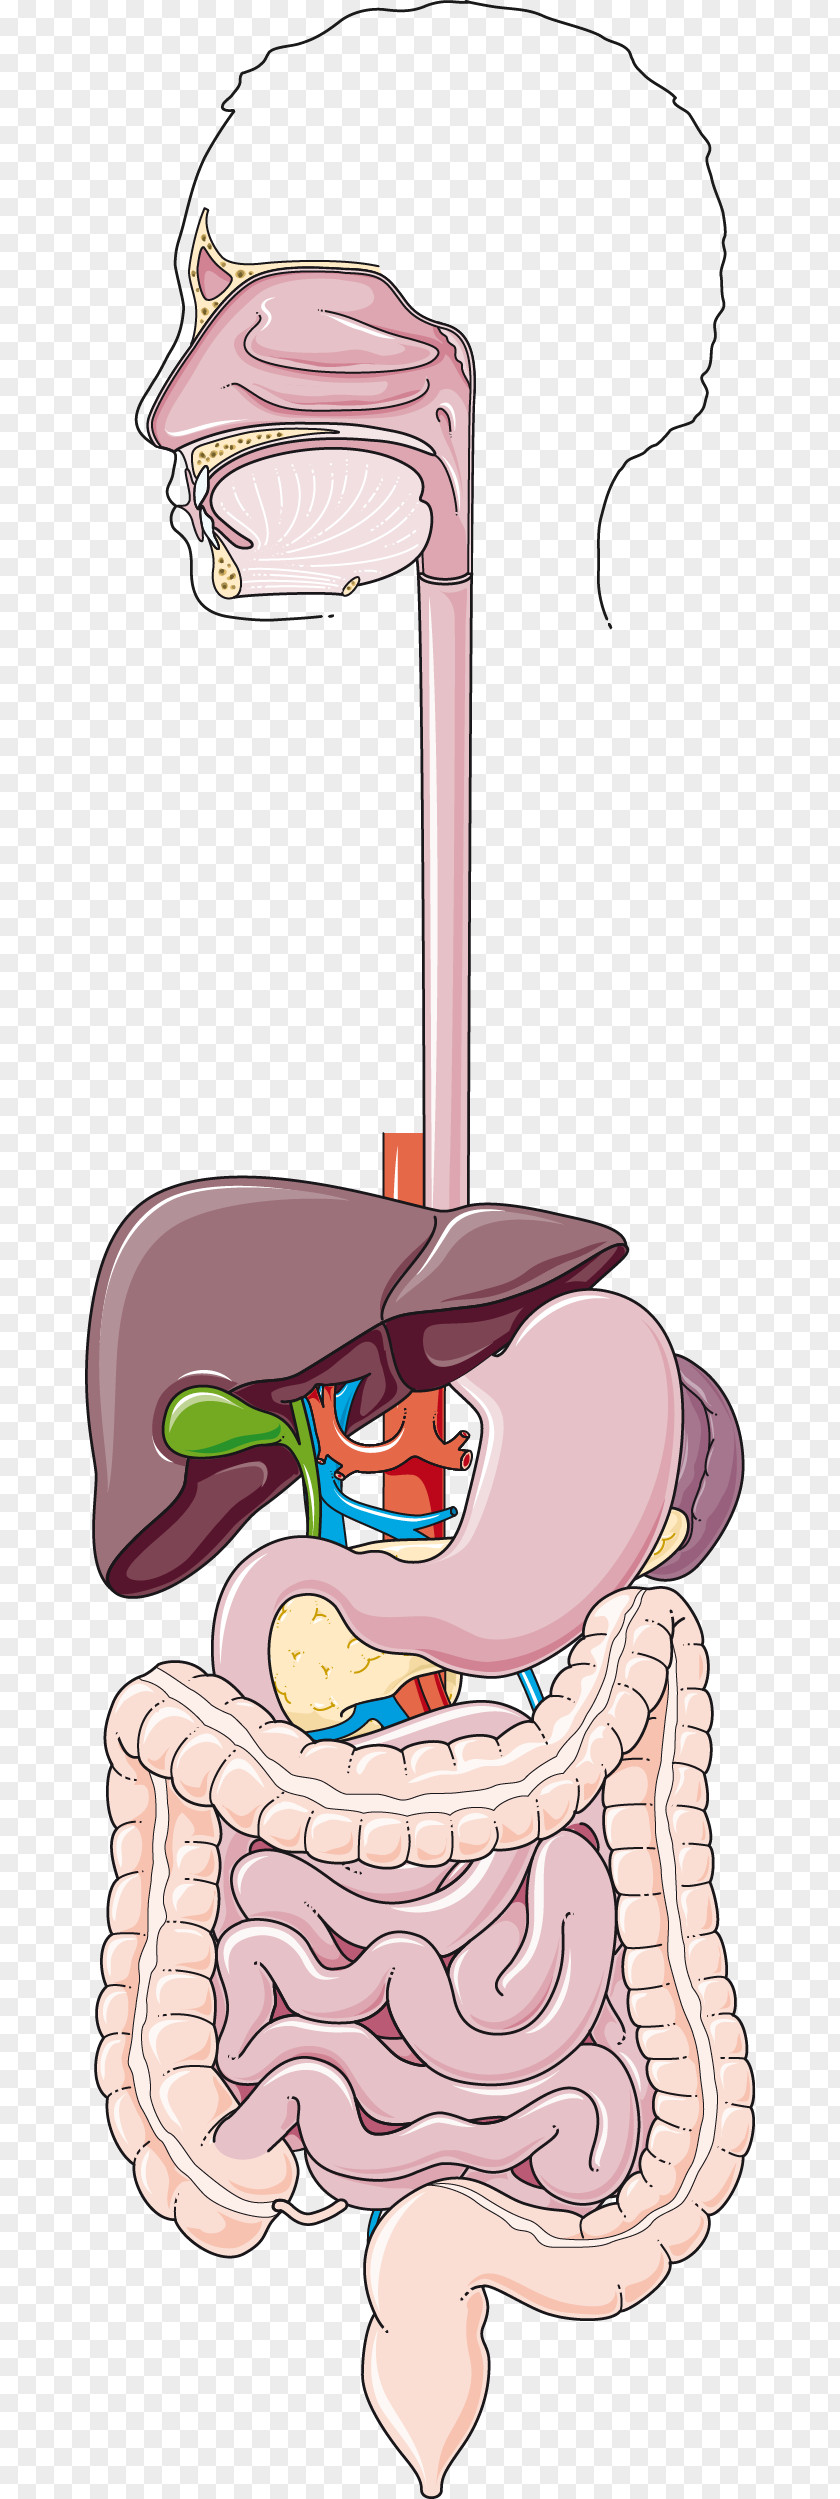 Human Digestive System Tooth Digestion Gastrointestinal Tract Body PNG digestive system tract body, oral cavity clipart PNG